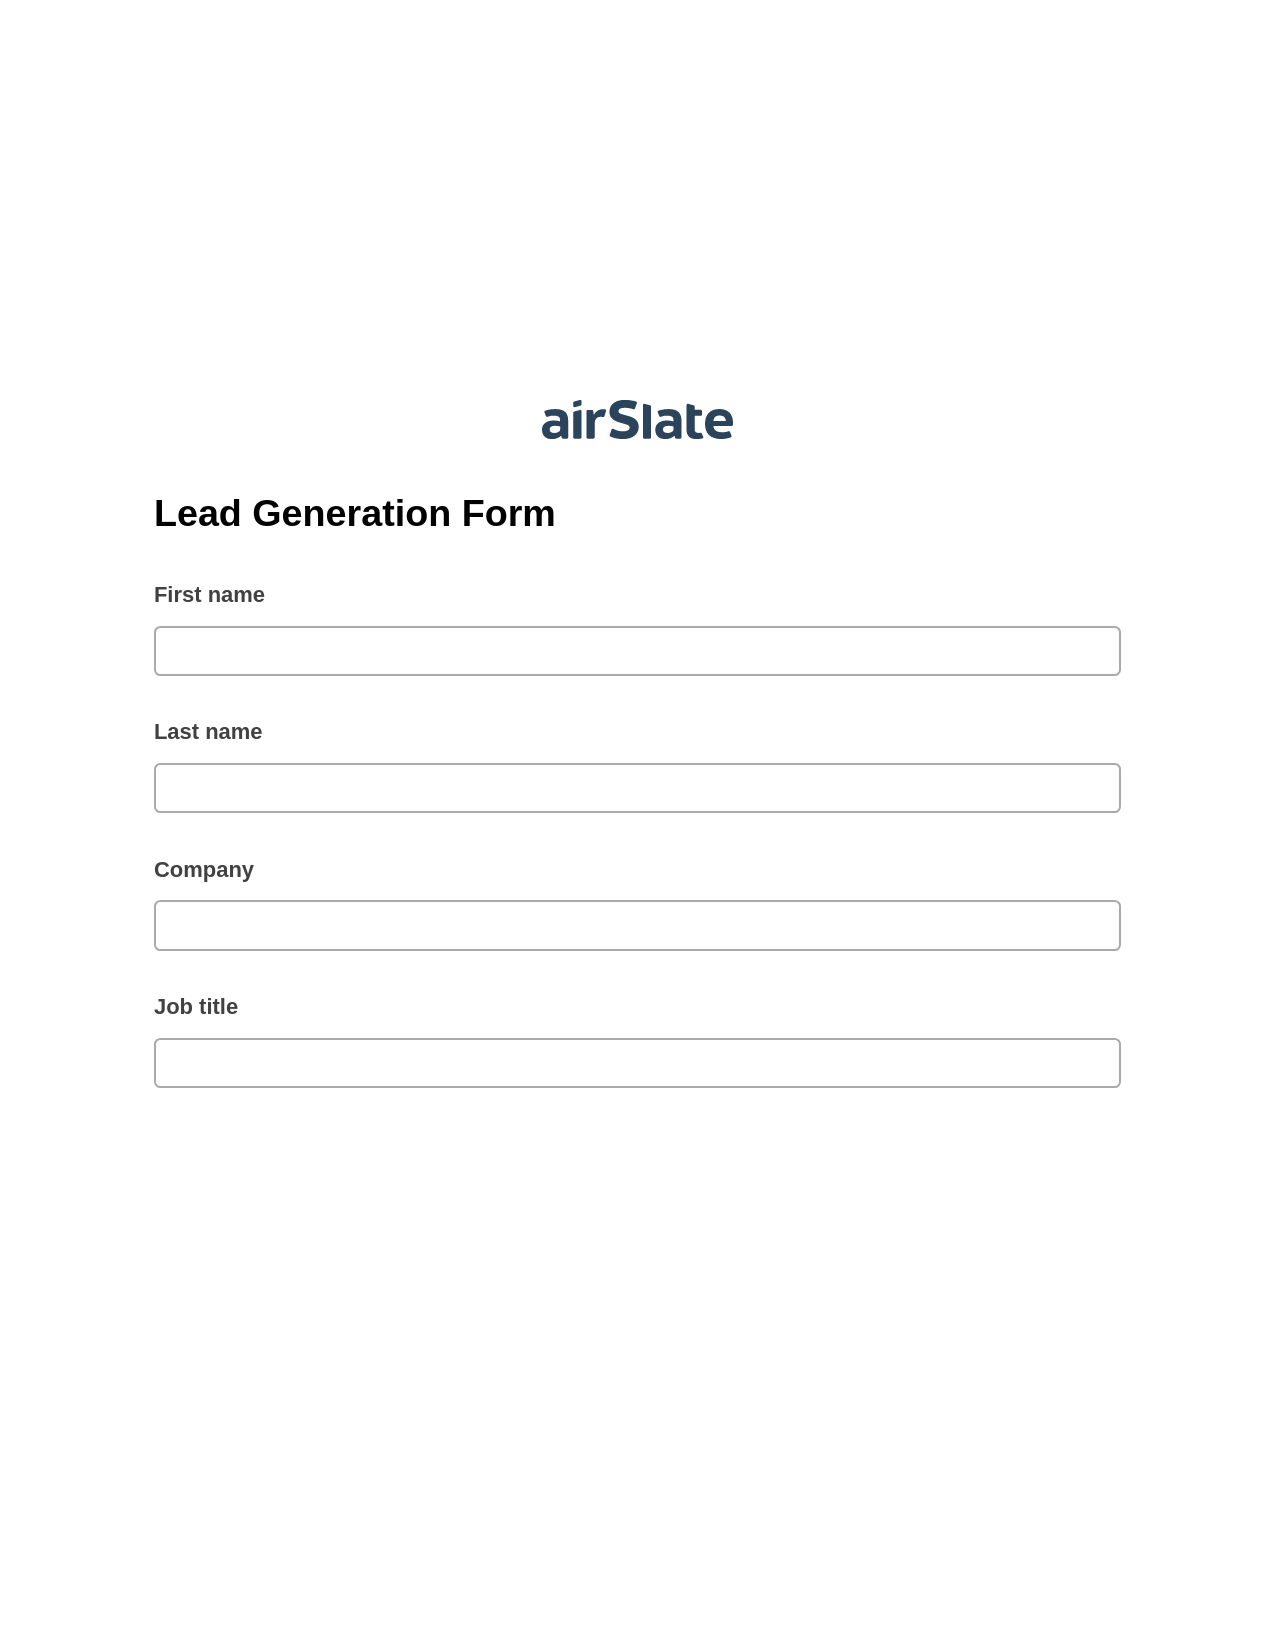 Multirole Lead Generation Form Pre-fill from CSV File Bot, Add Tags to Slate Bot, Export to Google Sheet Bot